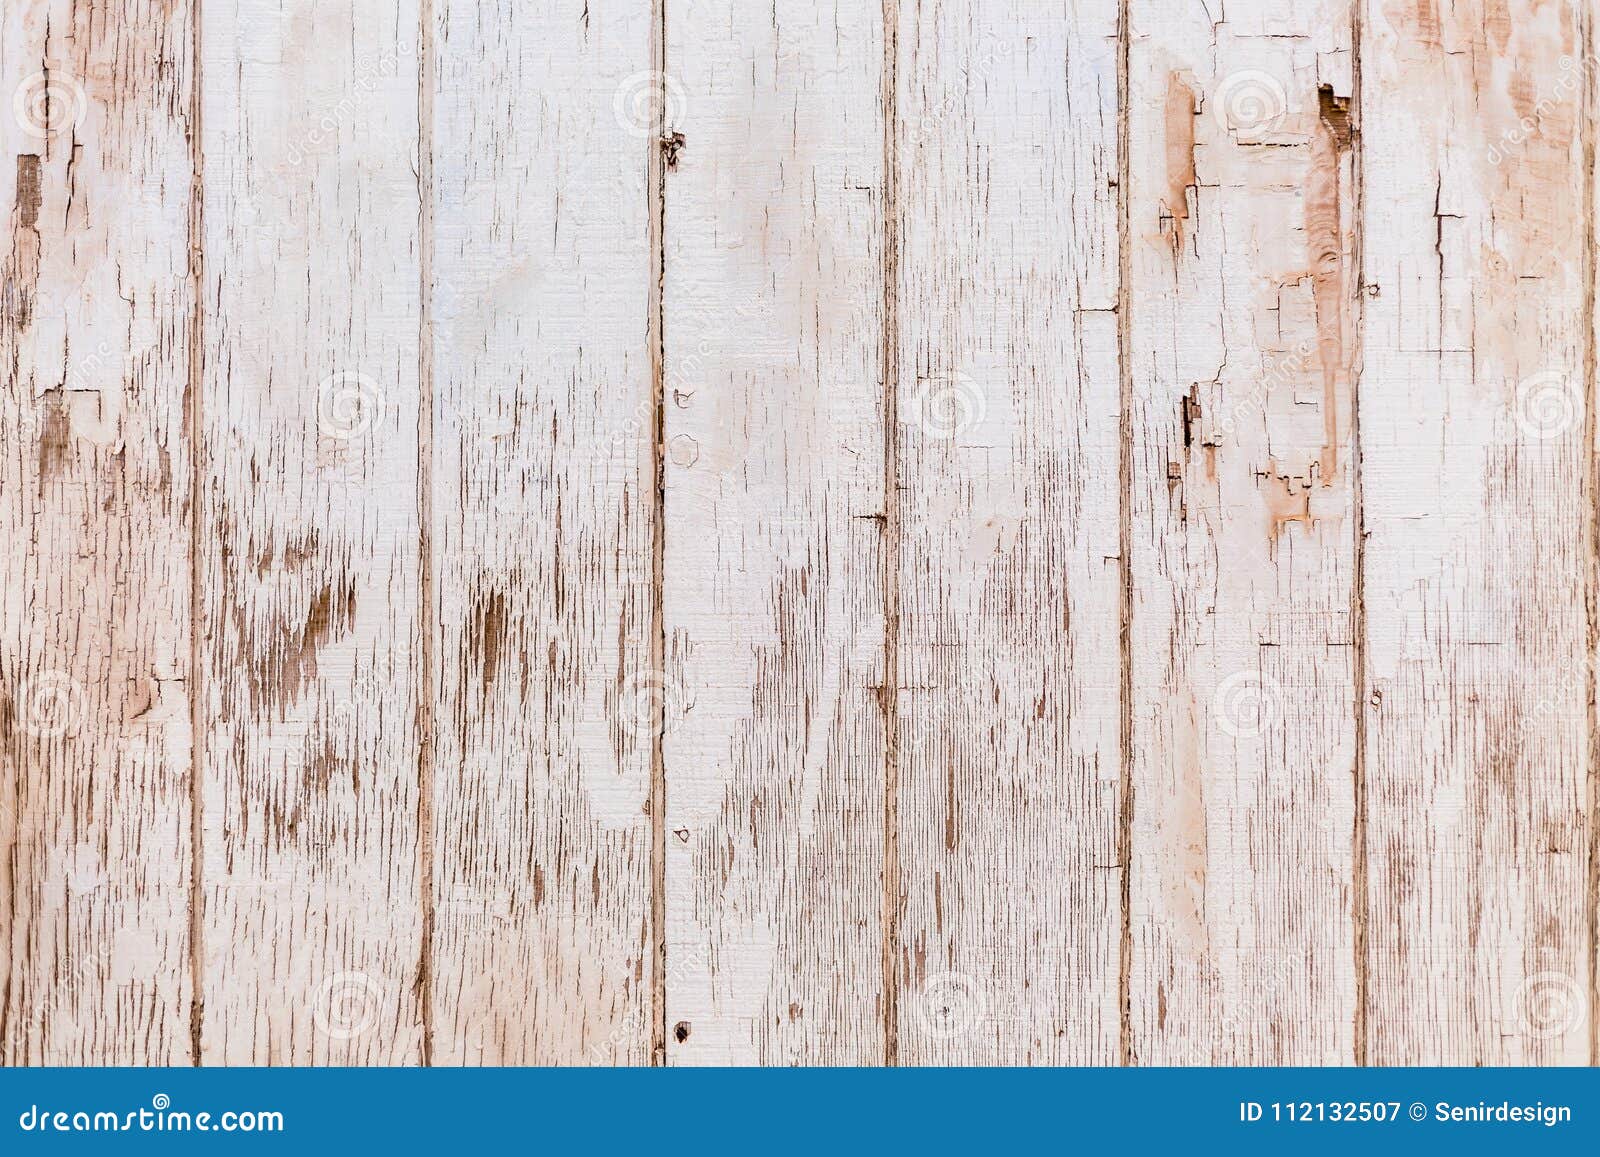 6 110 Old Panel Textures Wood Photos Free Royalty Free Stock Photos From Dreamstime